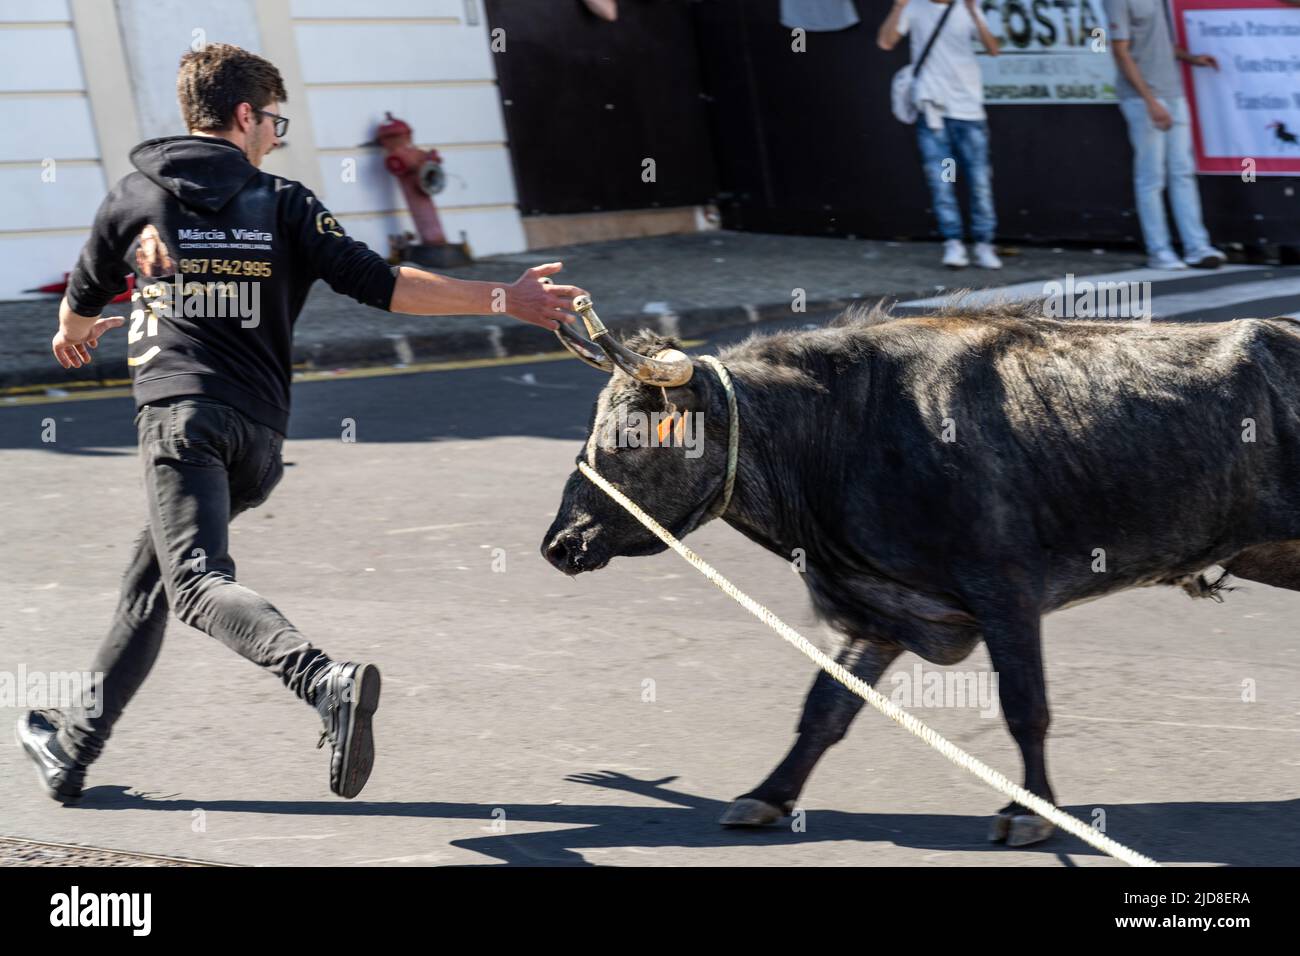 A bull chases a capinha or amateur bullfighter during a tourada a corda, also called a bull-on-a-rope at the Sanjoaninas festival, June 18, 2022 in Angra do Heroísmo, Terceira Island, Azores, Portugal. During the uniquely Azorean event a bull tied to a long rope runs loose as participants attempt to distract or run from the bull. Stock Photo